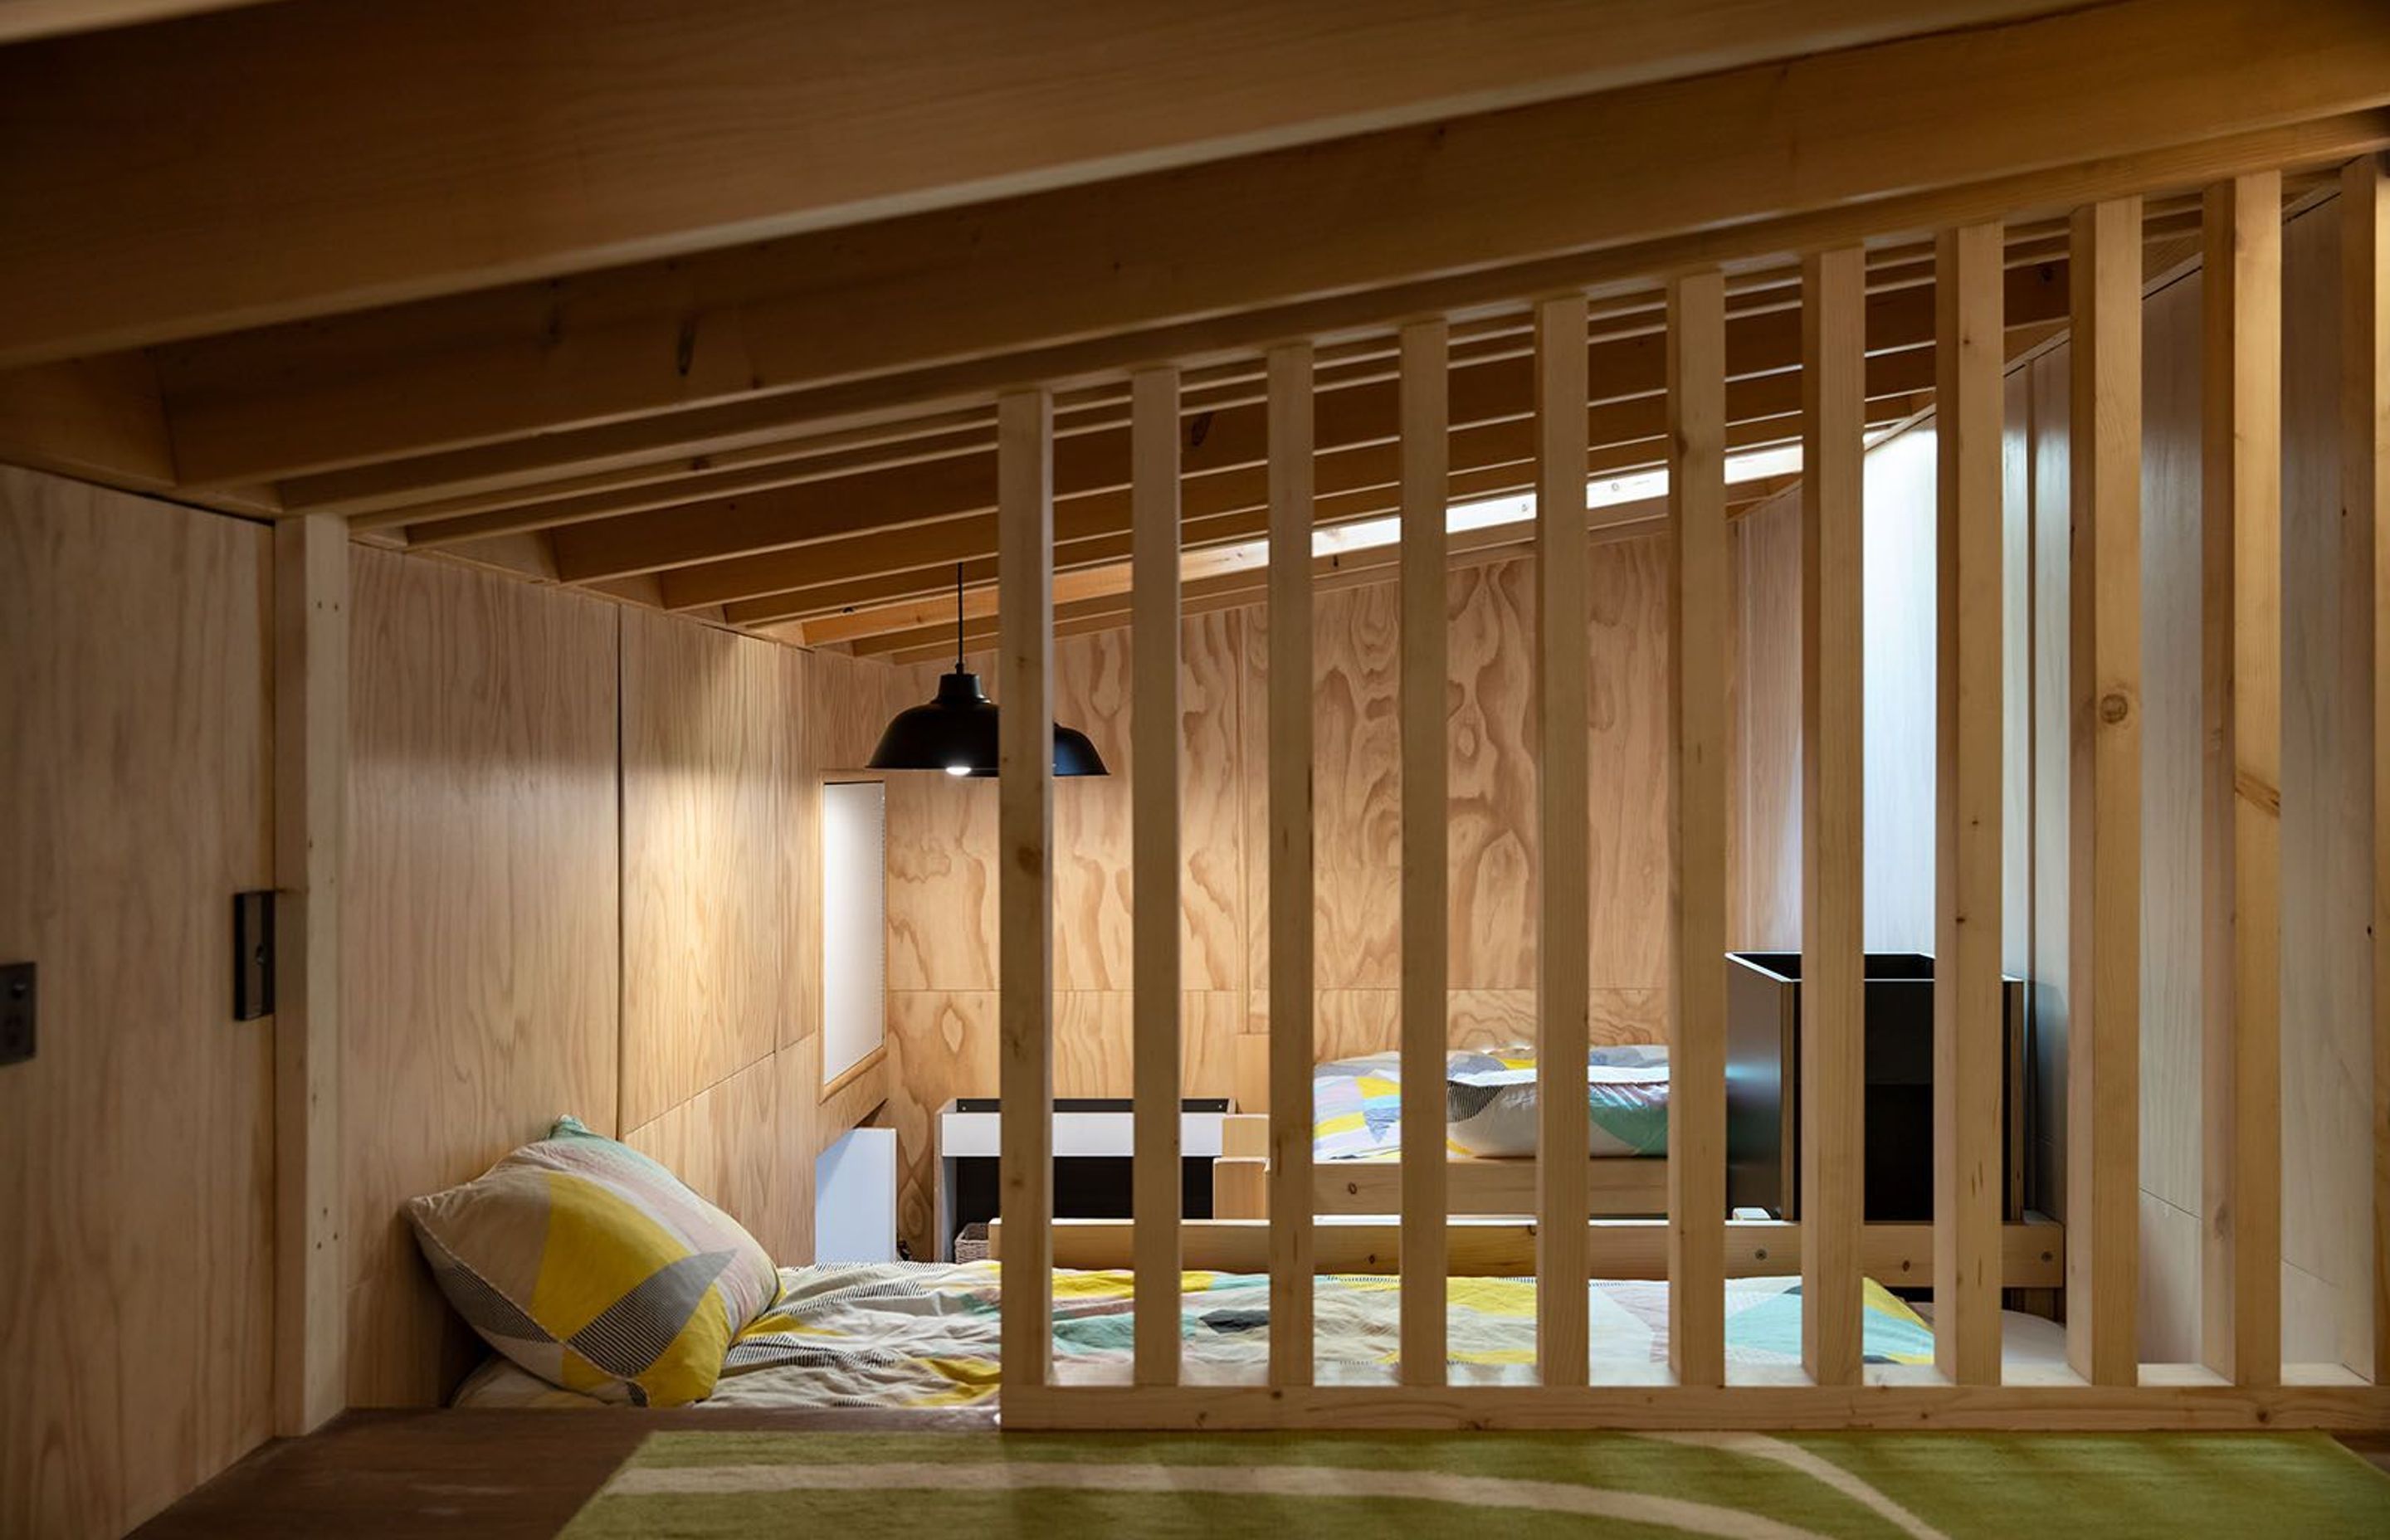 The top-lit loft bedroom doubles as a play space for the owners' young children.